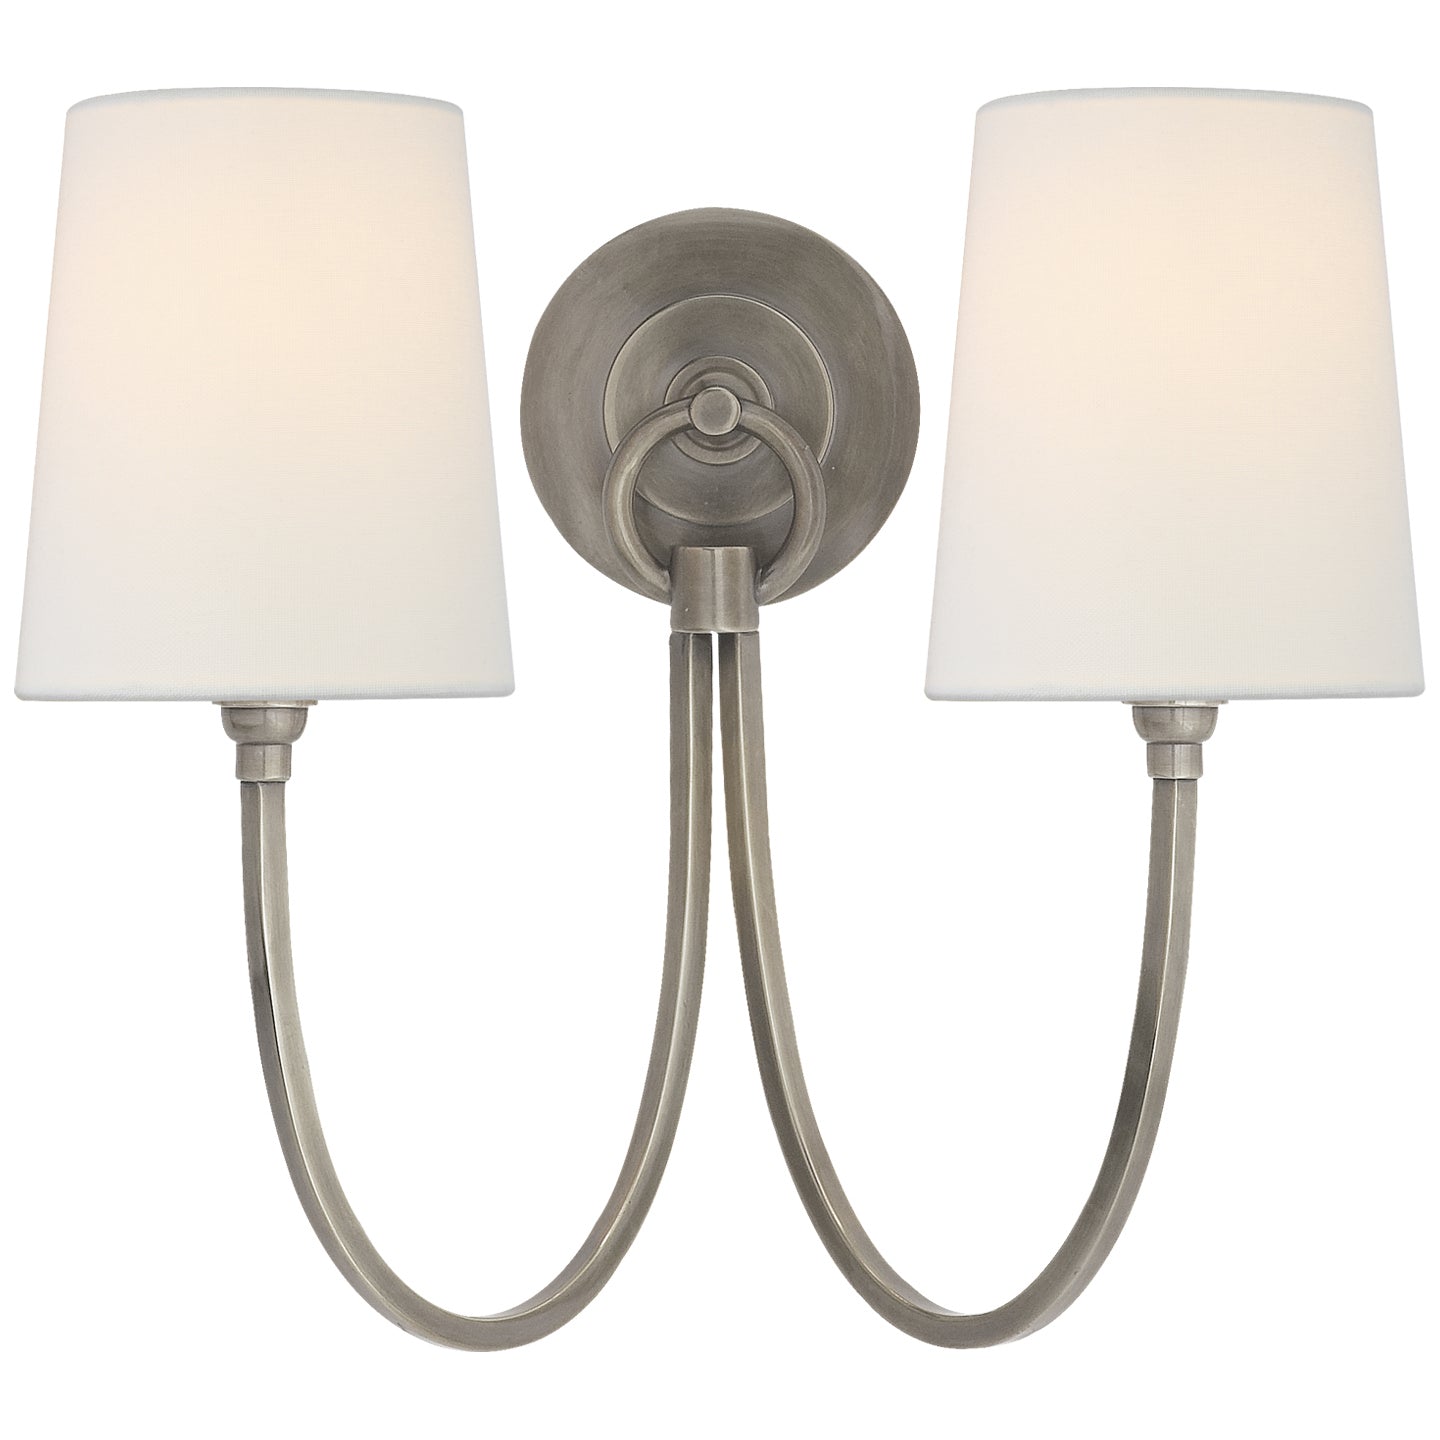 Visual Comfort Signature Canada - Two Light Wall Sconce - Reed - Antique Nickel- Union Lighting Luminaires Decor